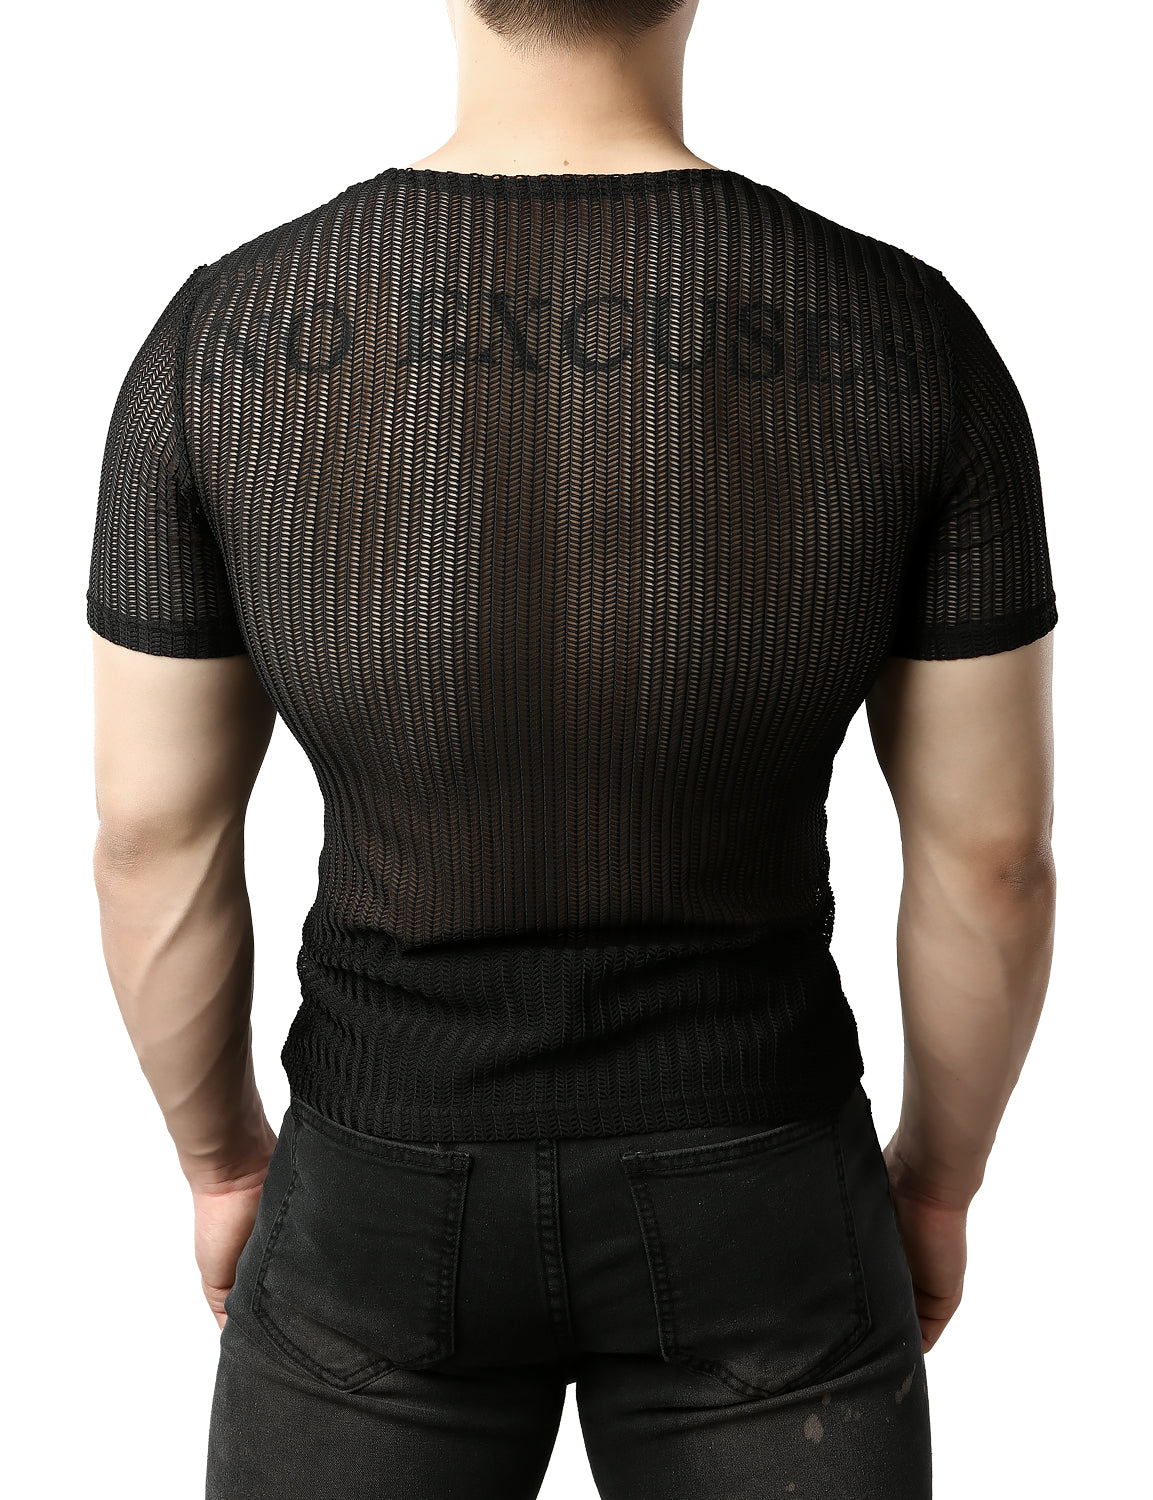 JOGAL Men's Mesh See Through Fitted Short Sleeve Muscle Top